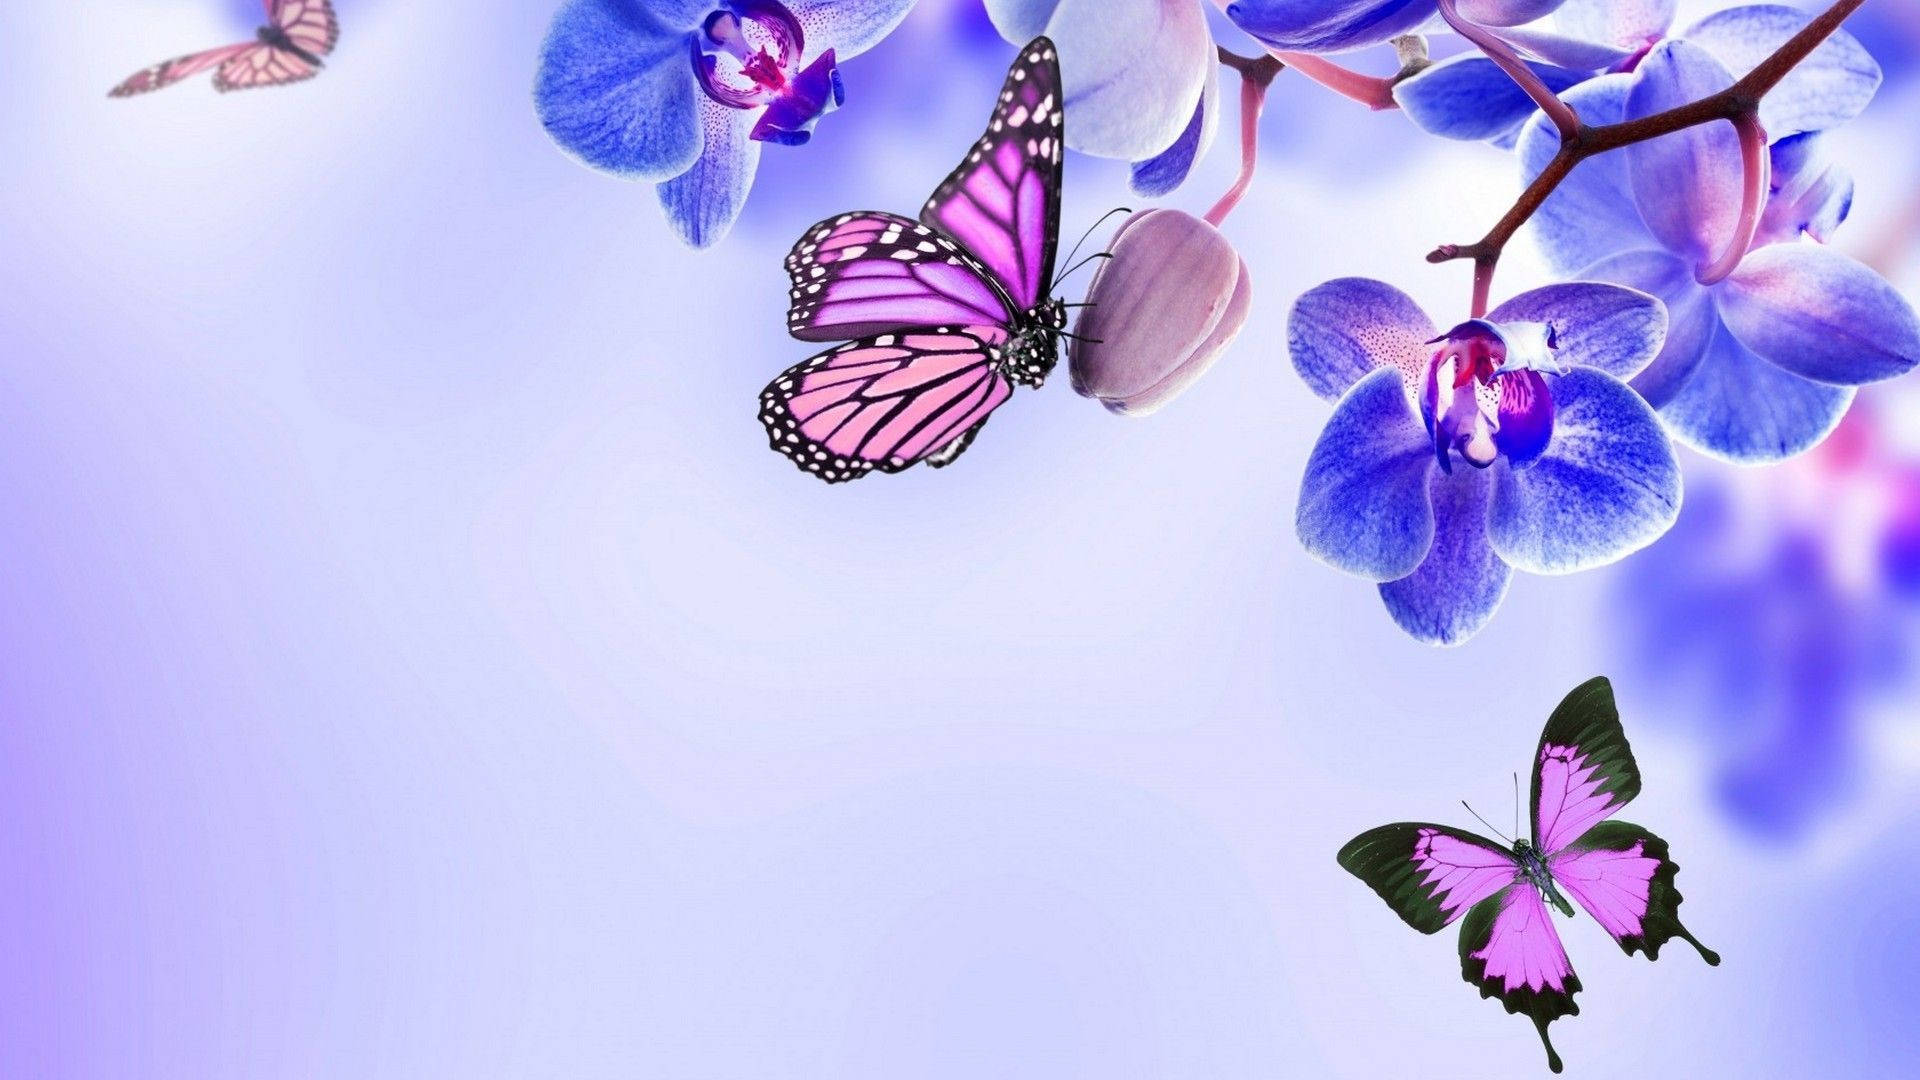 Butterfly Book Flowers  Free photo on Pixabay  Pixabay